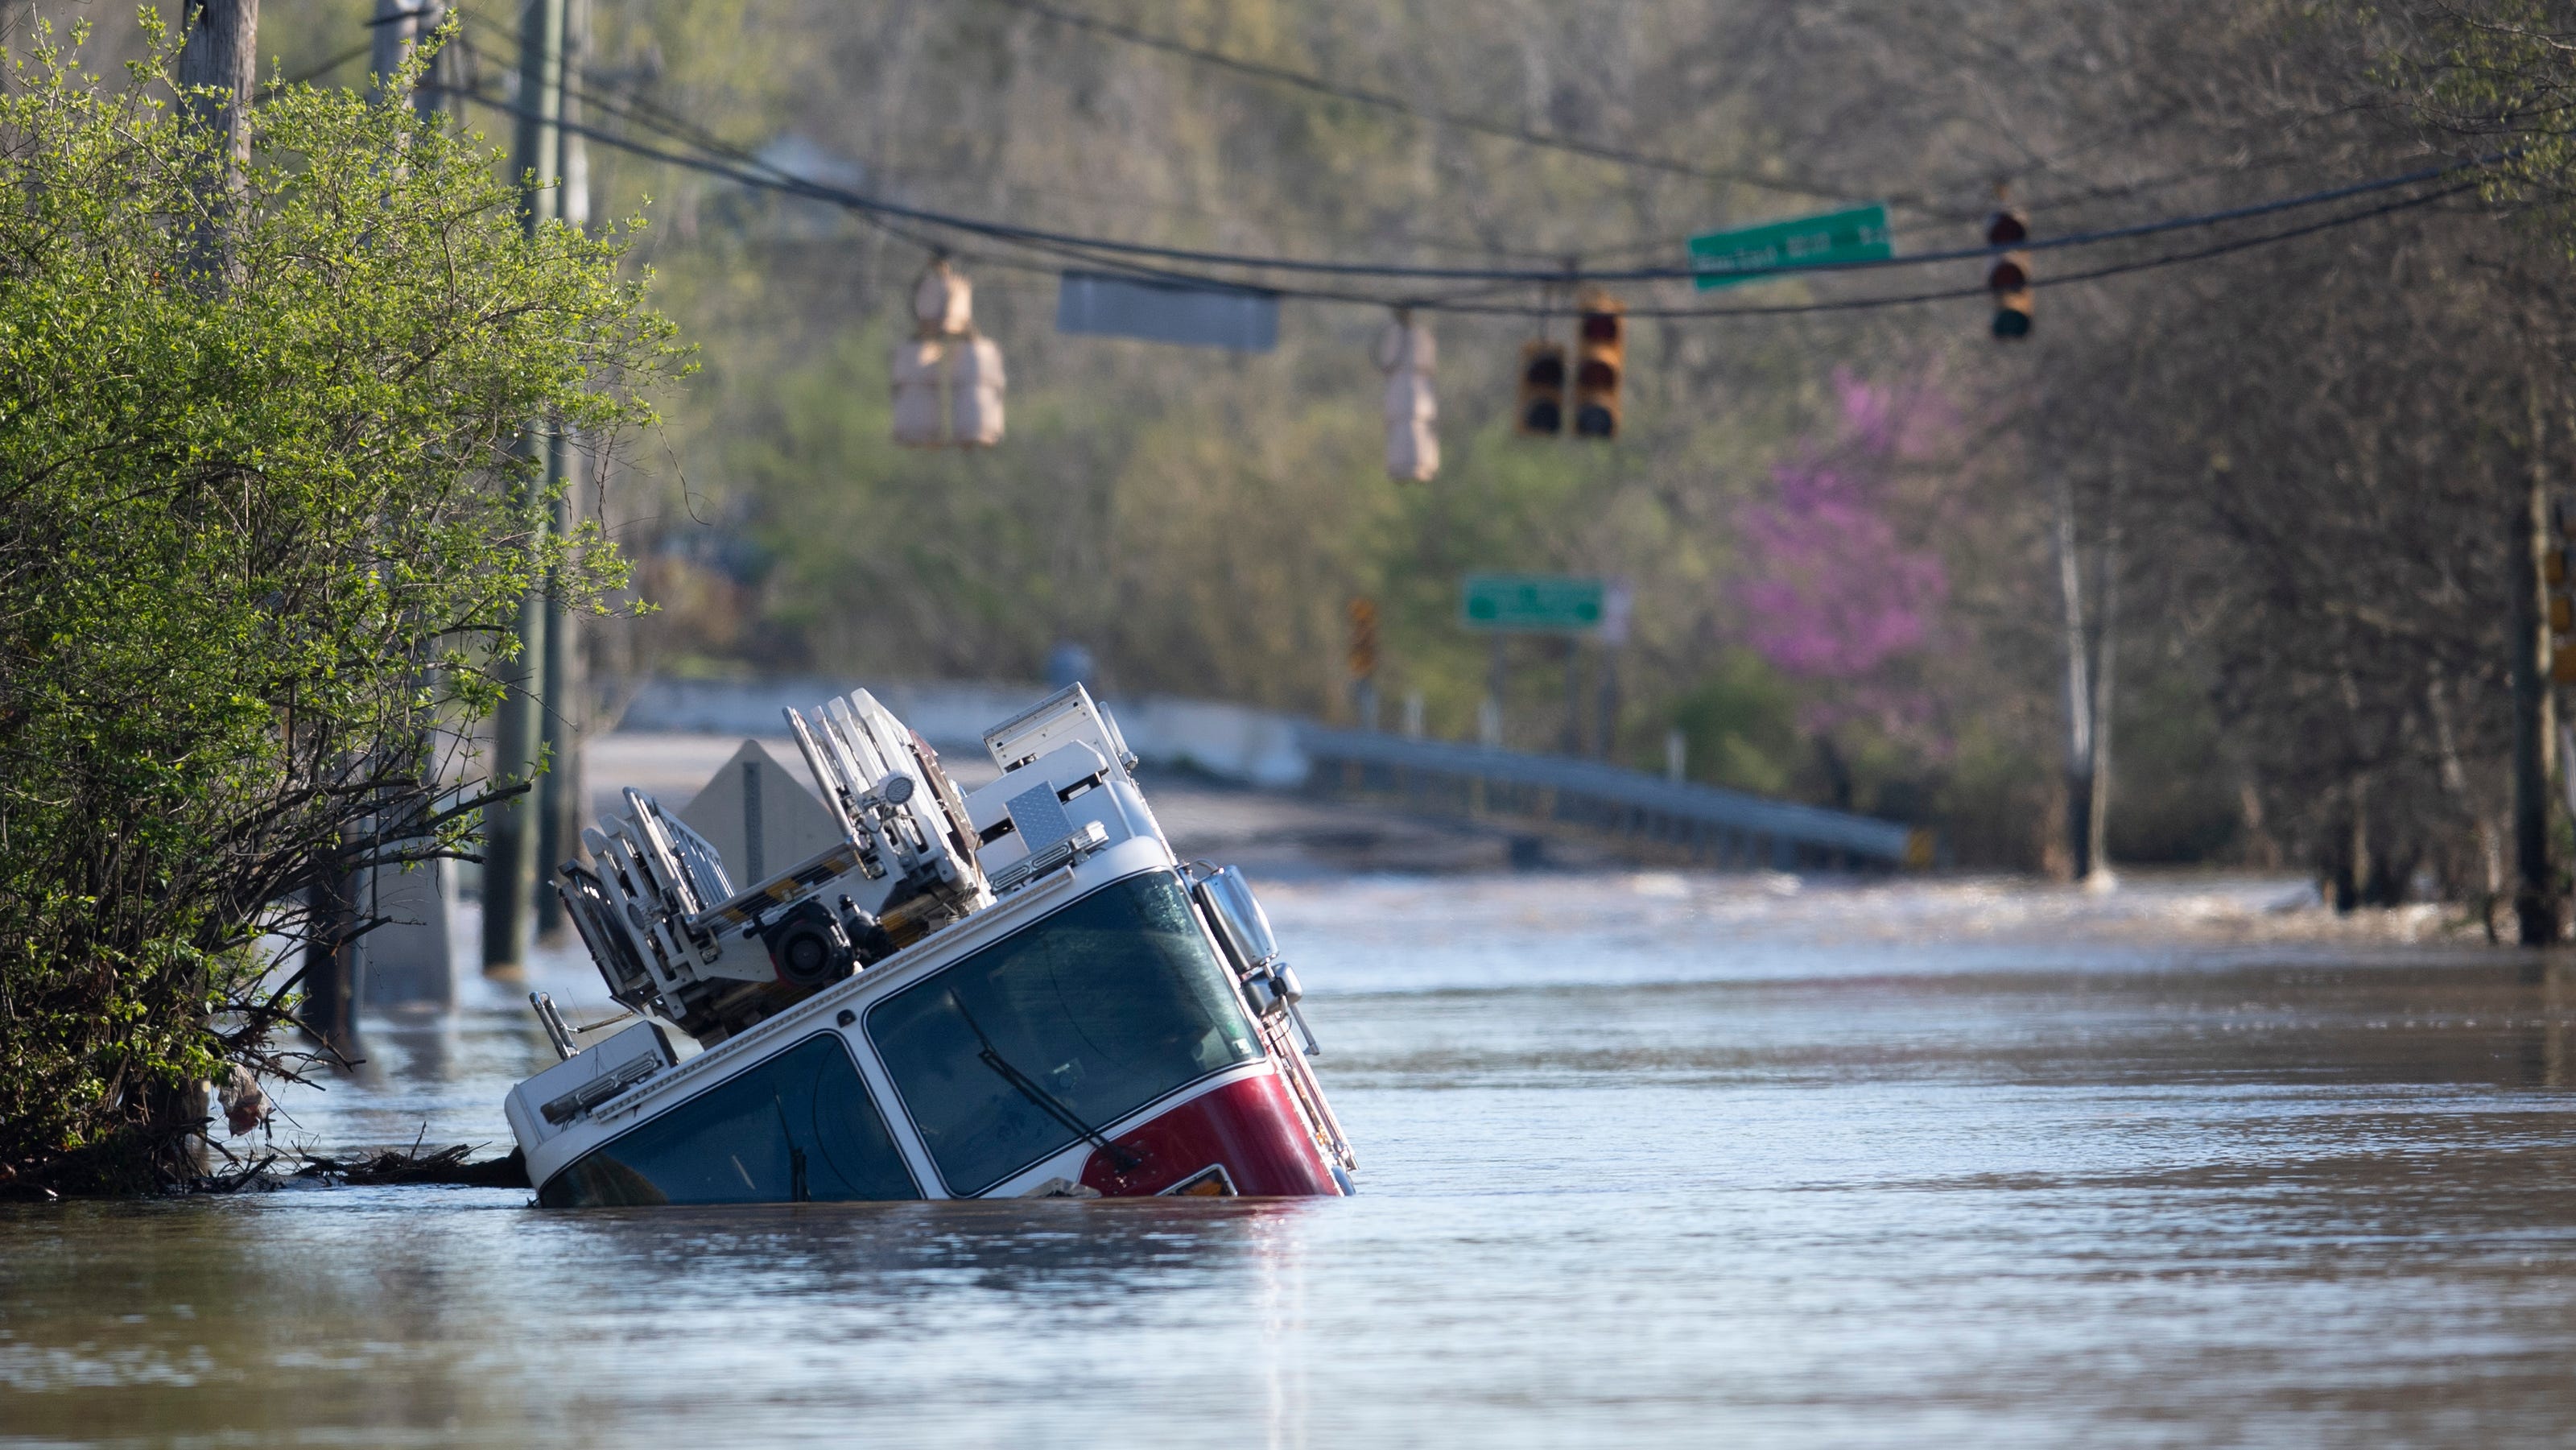 Nashville flooding Everything came together at 'wrong' moment, NWS says